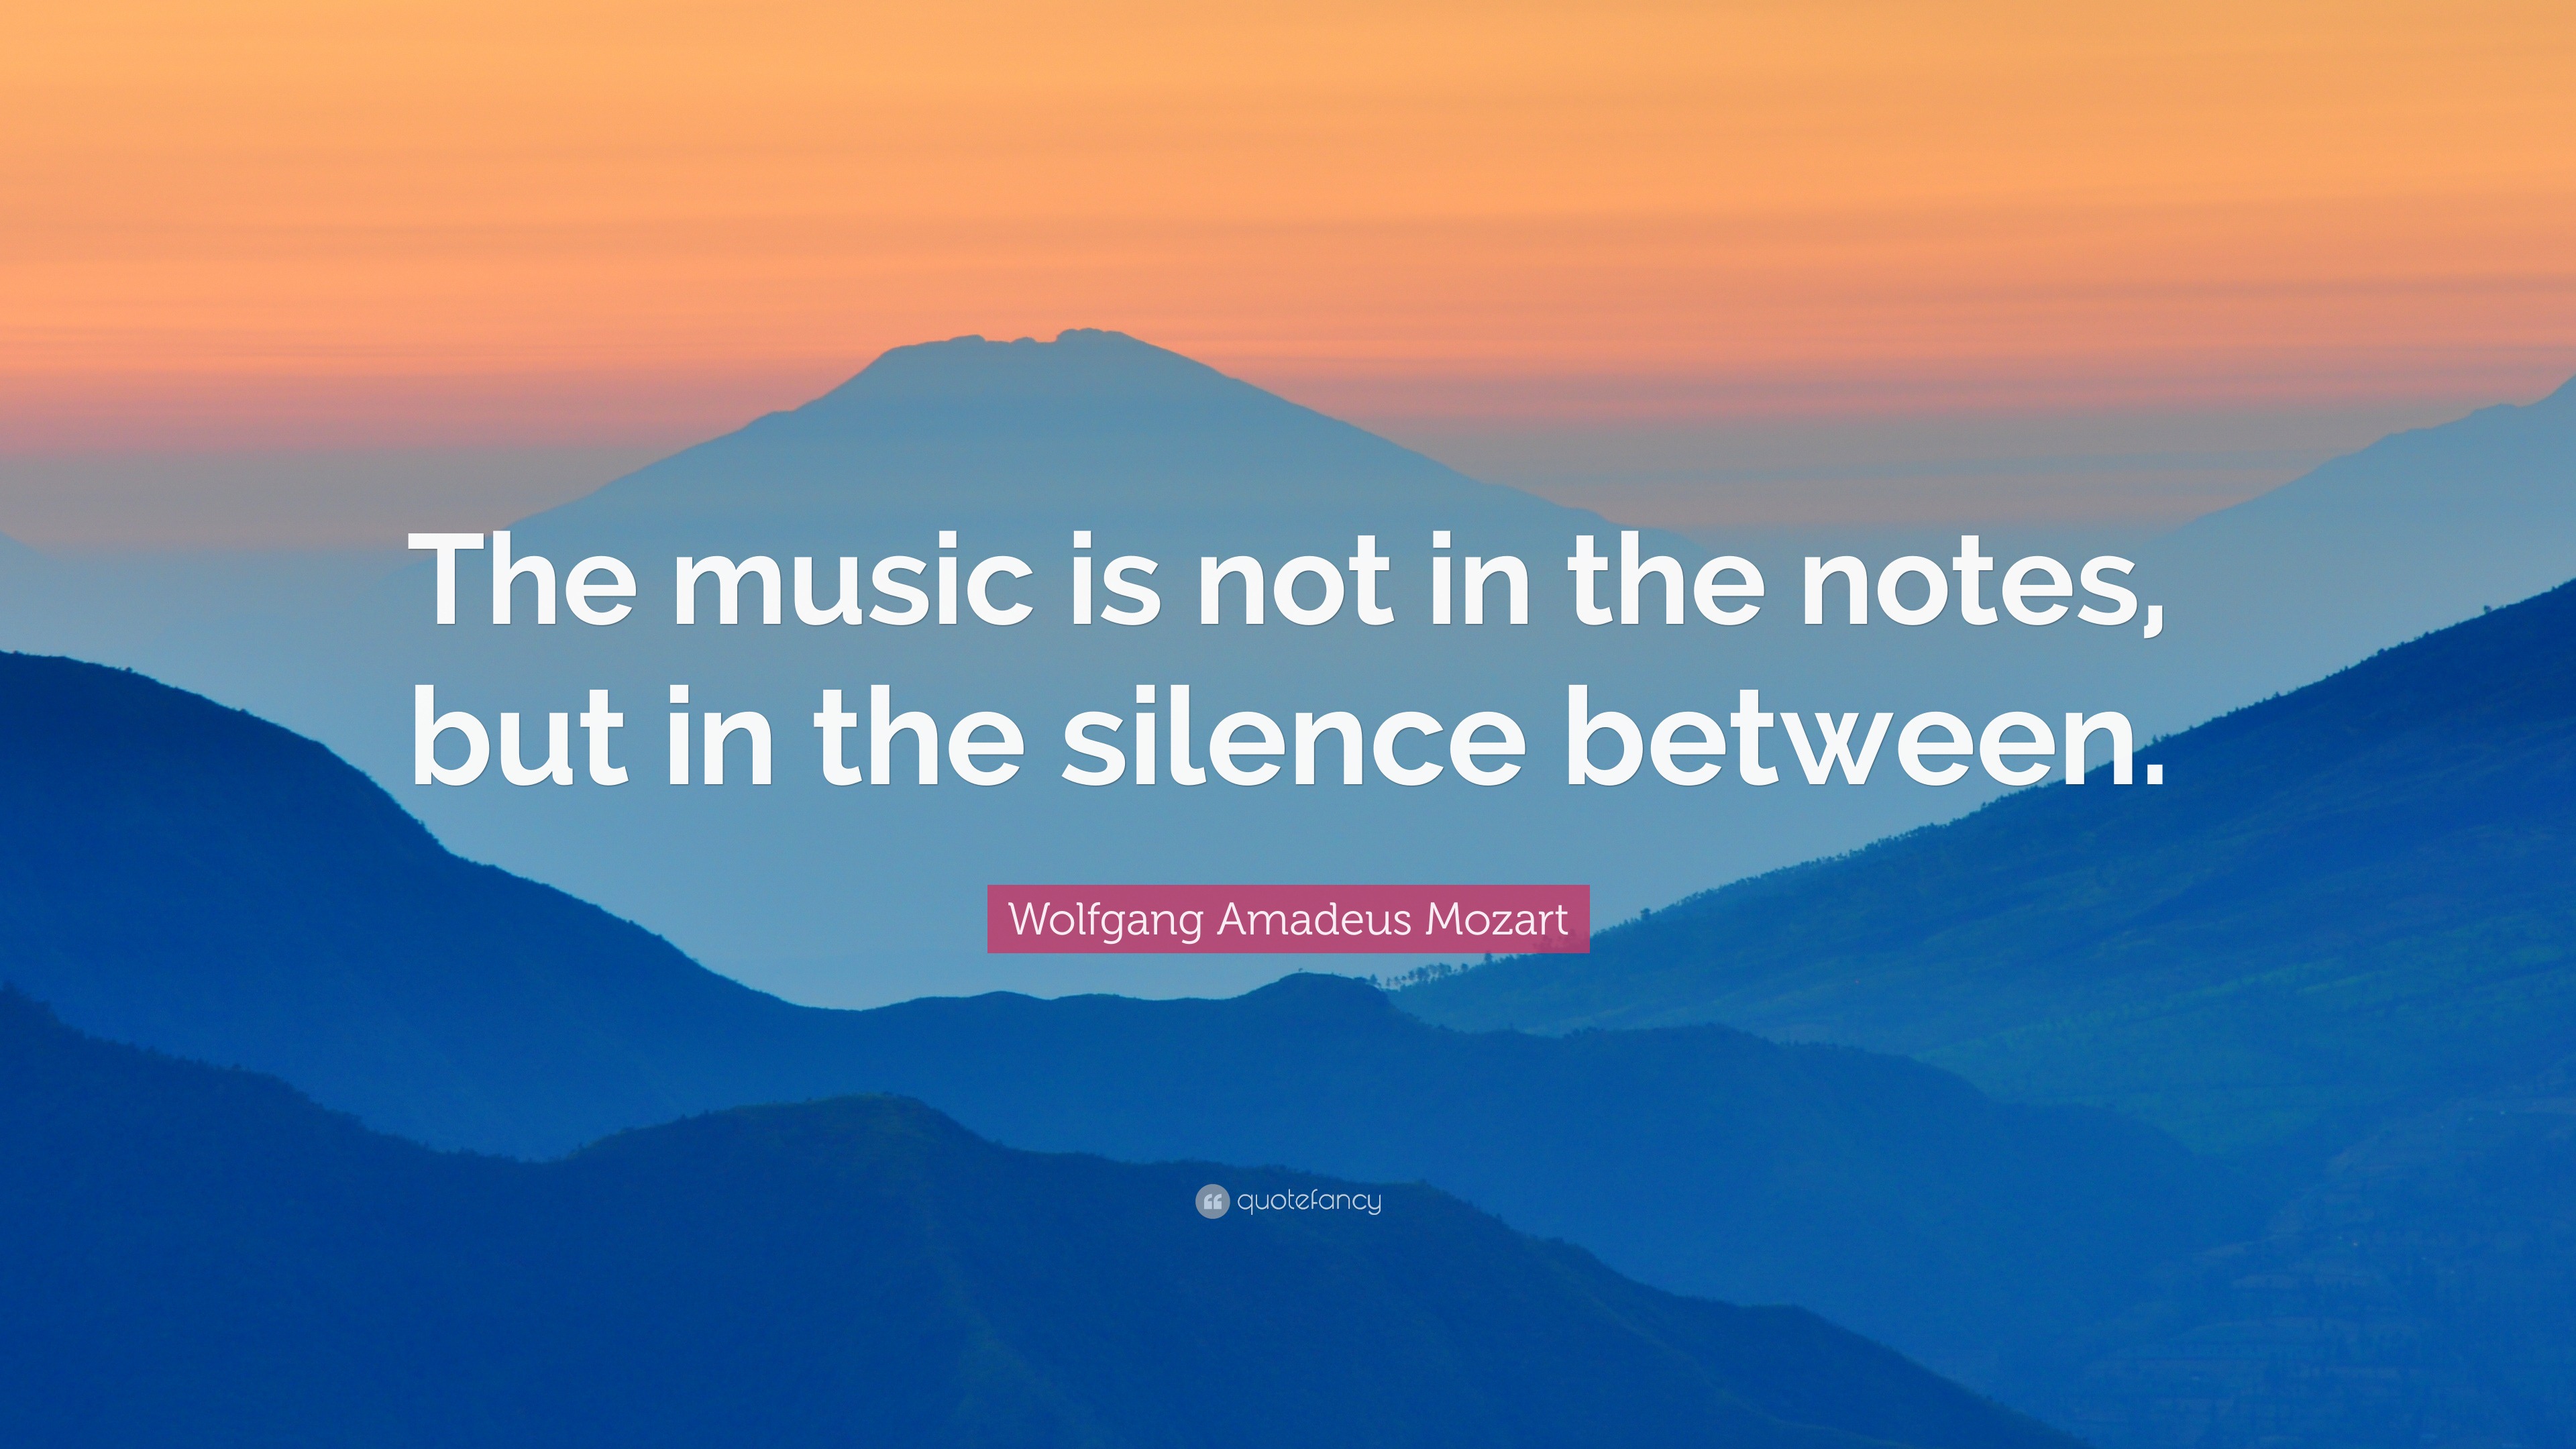 Wolfgang Amadeus Mozart Quote: “The music is not in the notes, but in